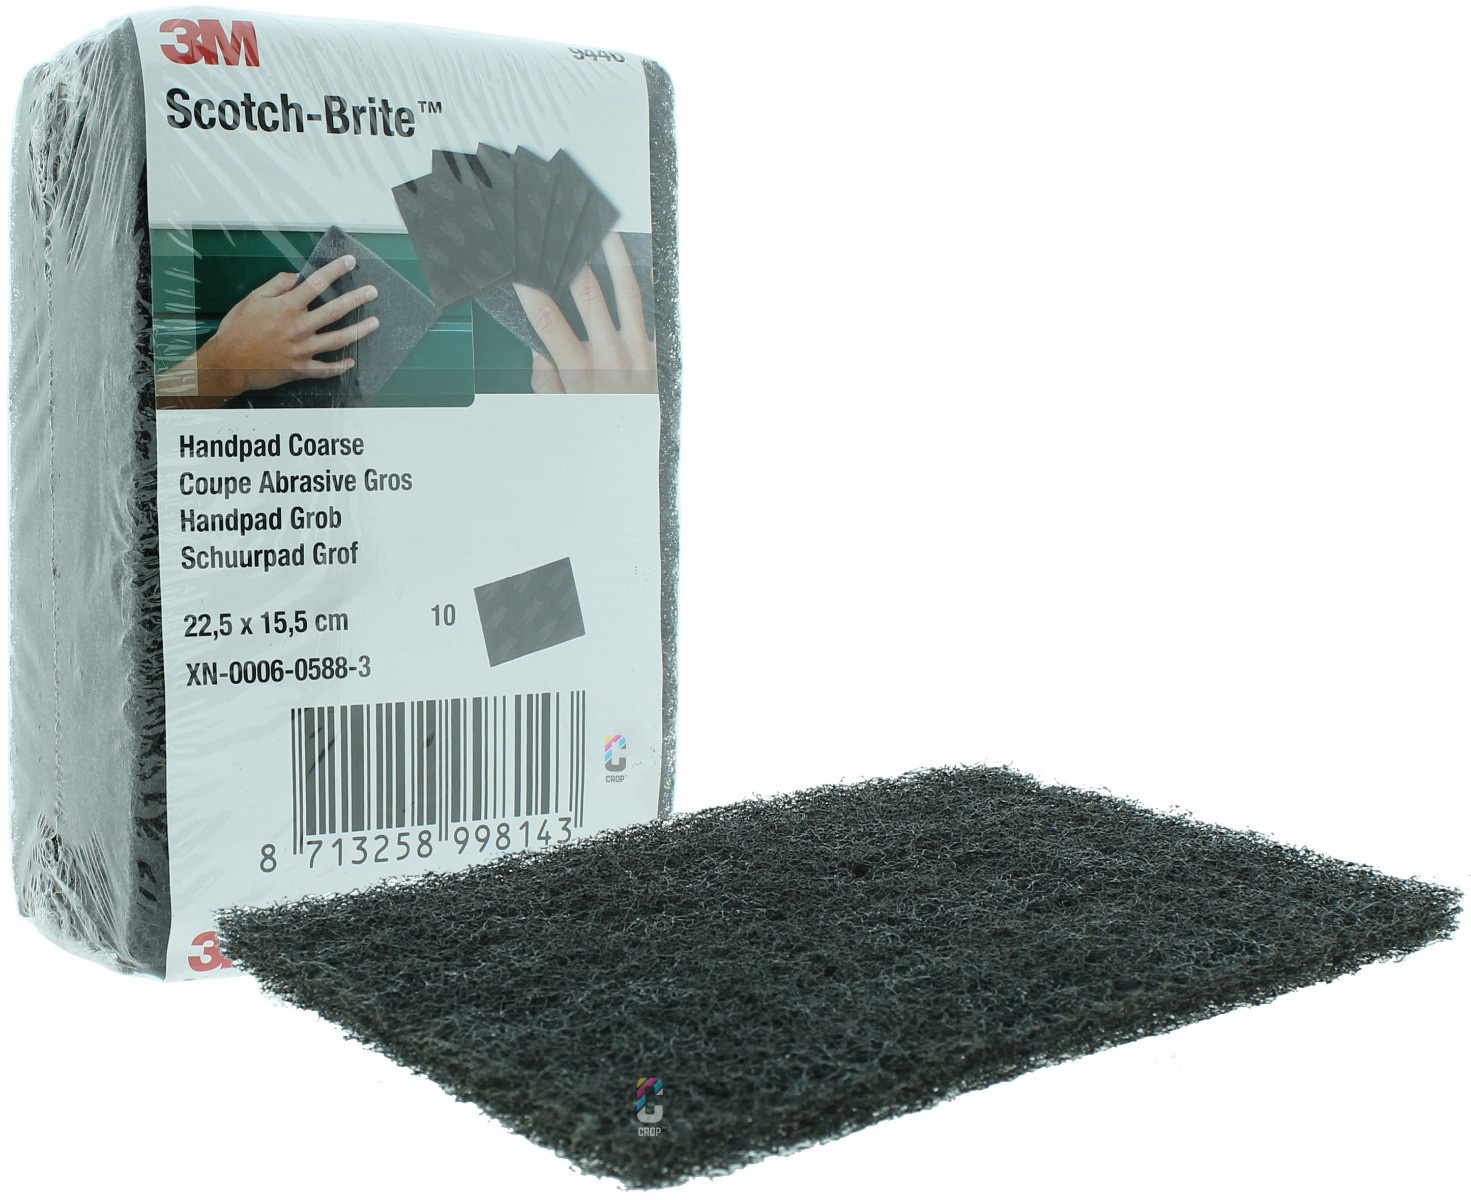 3M Scotch-Brite Hand Pads for Woodworkers